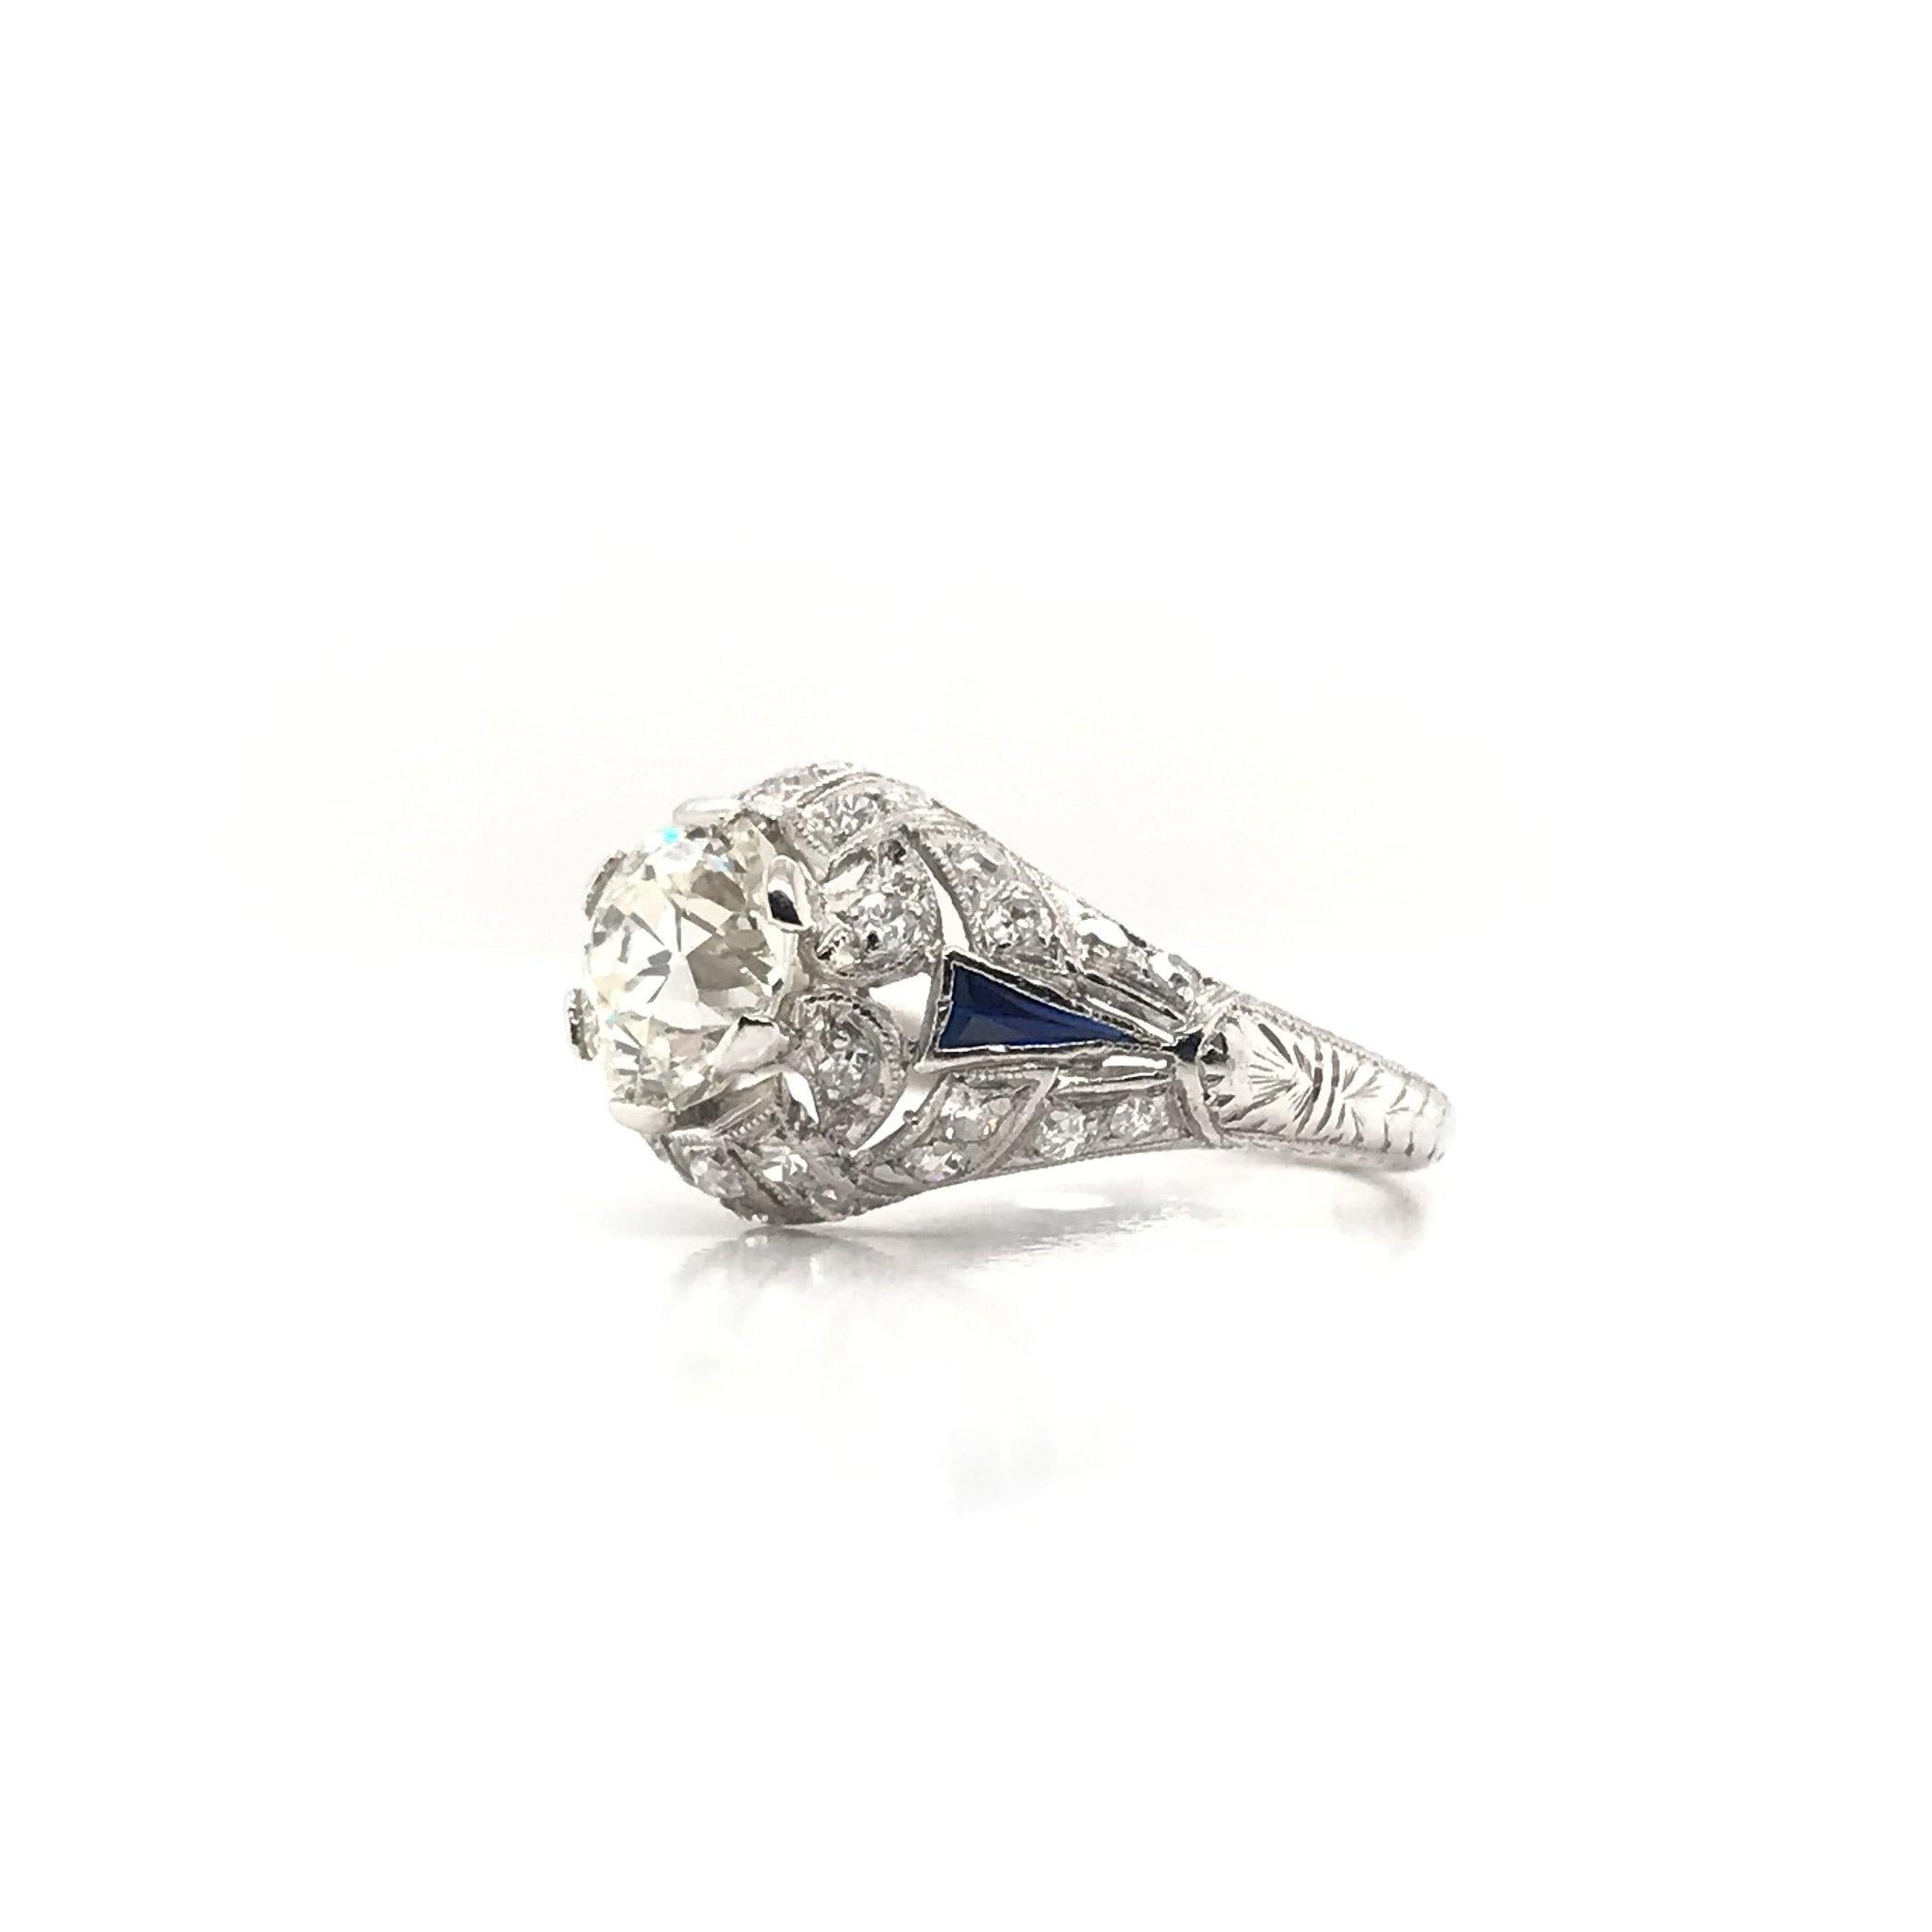 This stunning antique piece was skillfully handcrafted sometime during the Art Deco design period ( 1920-1940 ). The platinum setting features a beautiful 1.39 carat center diamond. The center diamond grades approximately K in color and VS1 in